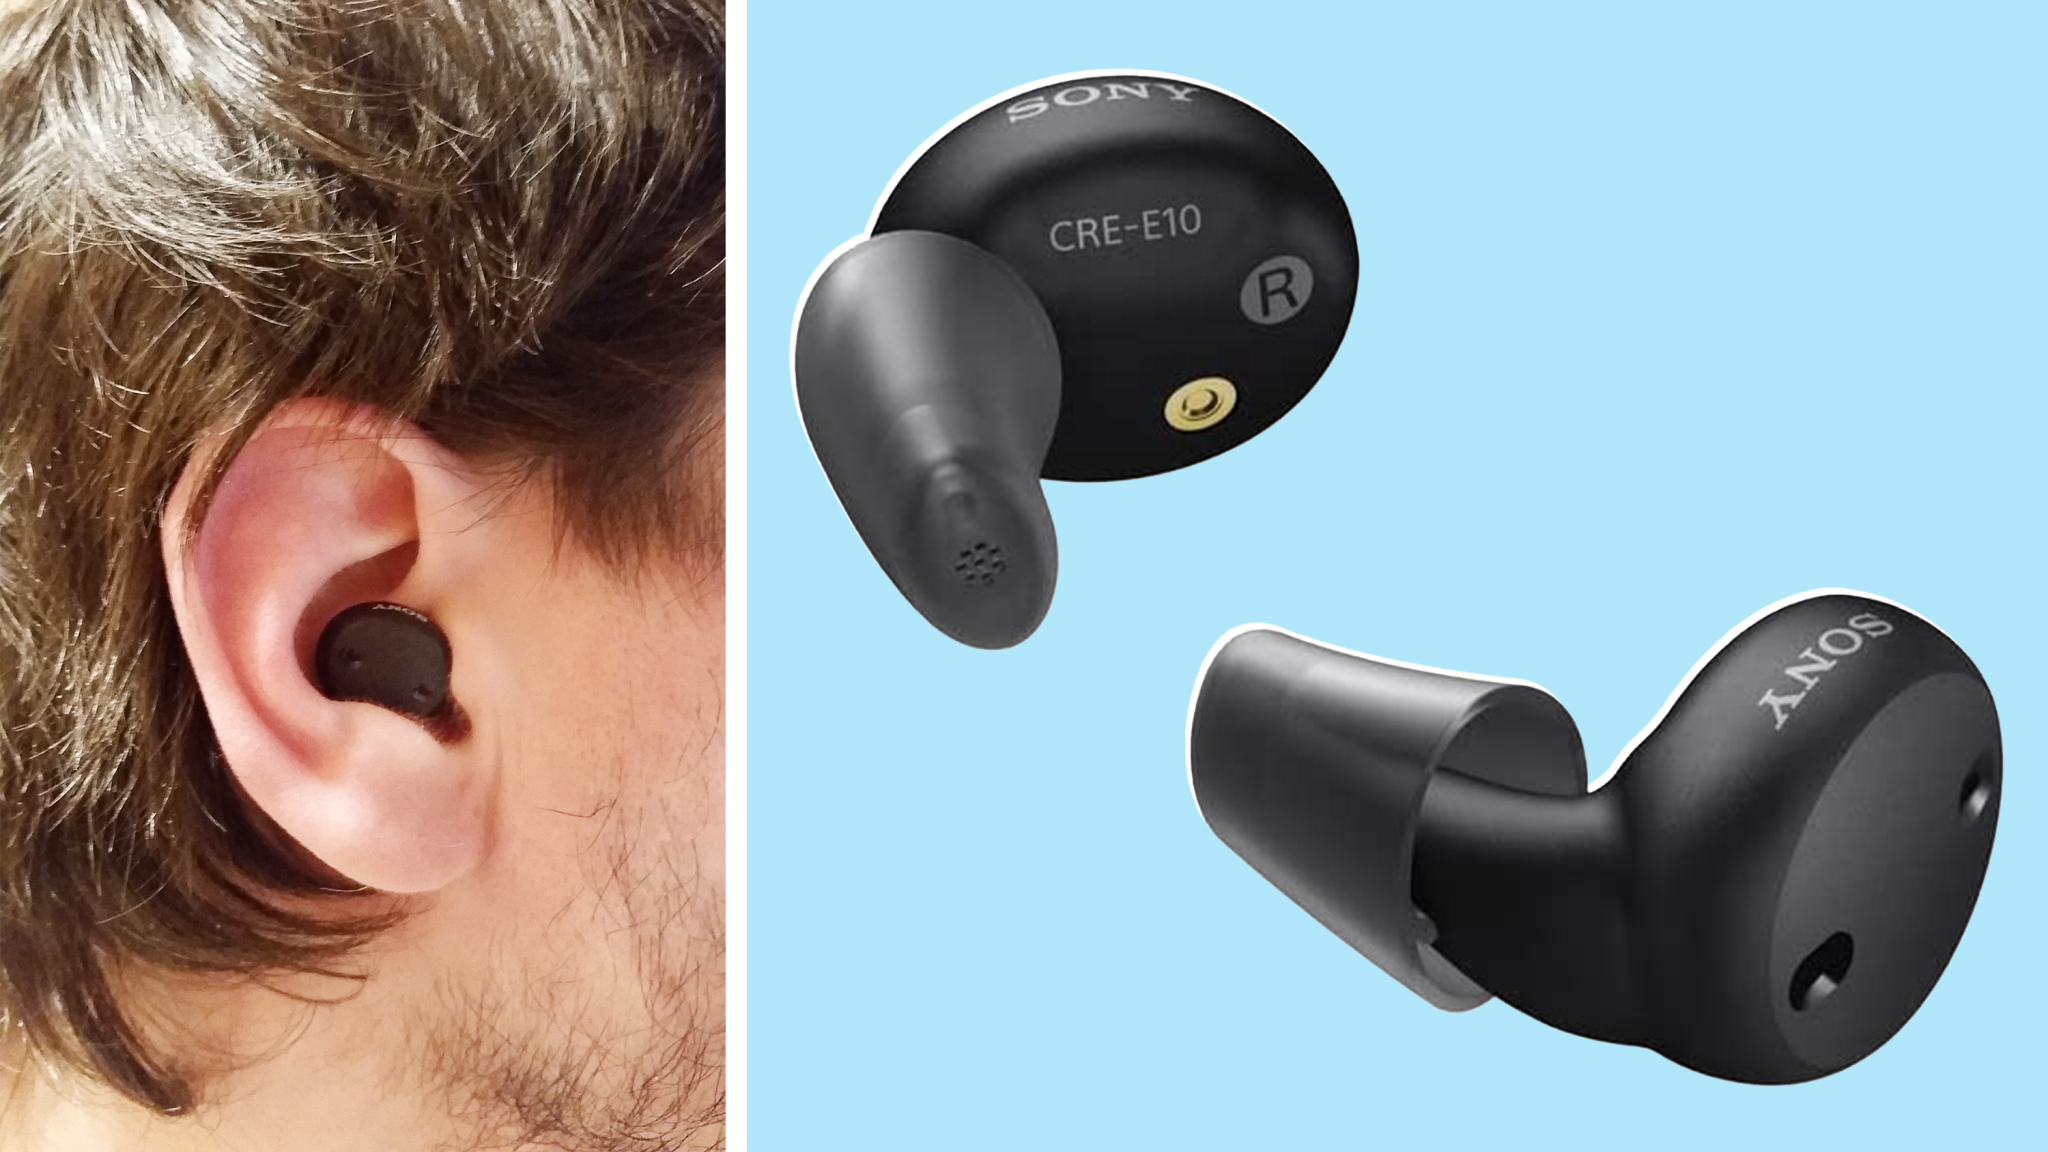 Sony CRE-E10 OTC hearing aid review